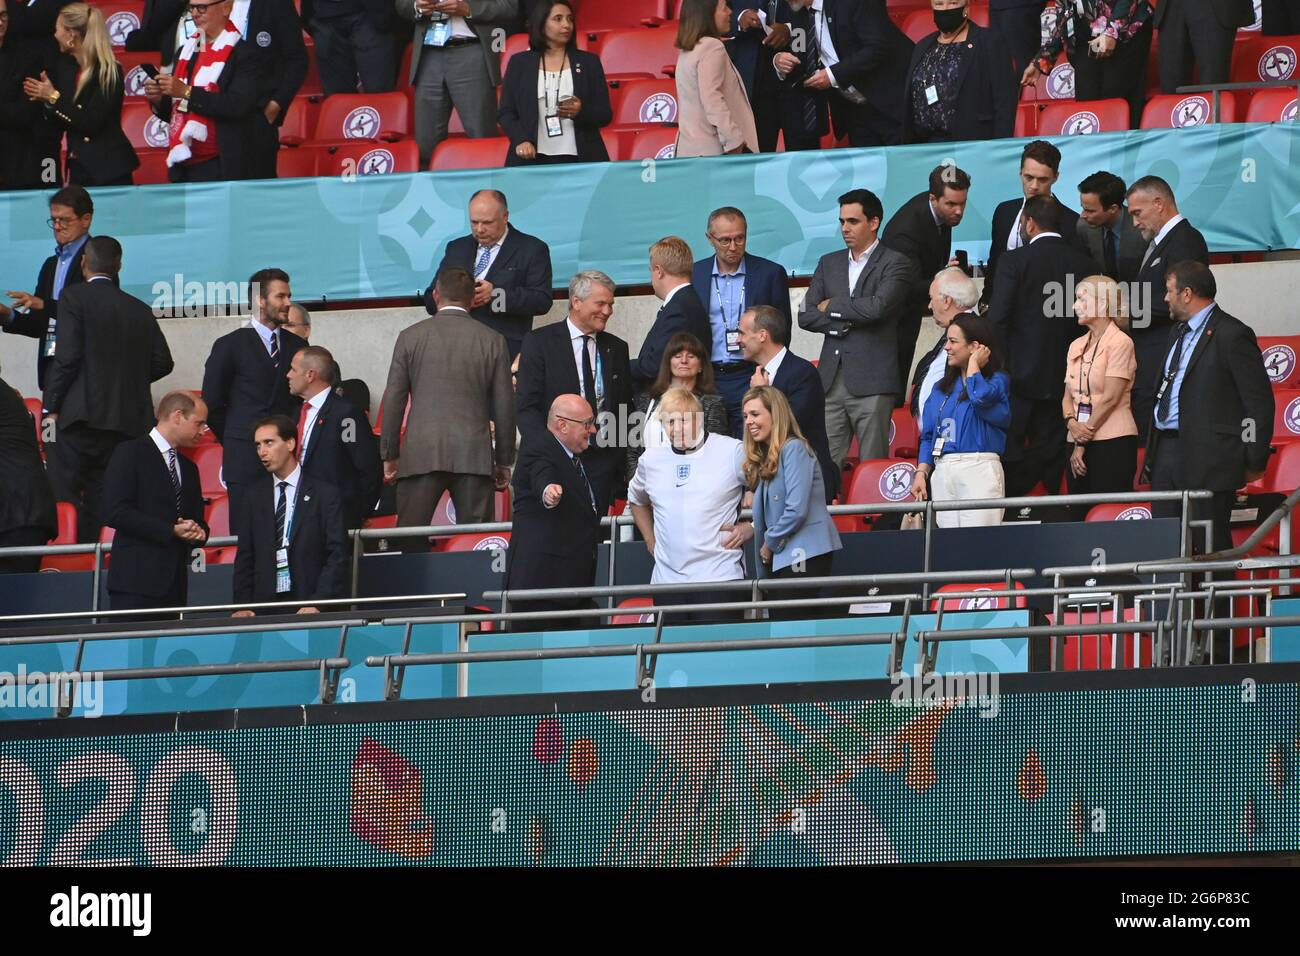 View of the VIP box, in the withte Prime Minister Boris JOHNSON with his wife Carrie SYMONDS, left Prince WILLIAM, feature, symbol photo, border motif, semifinals, game M50, England (ENG)